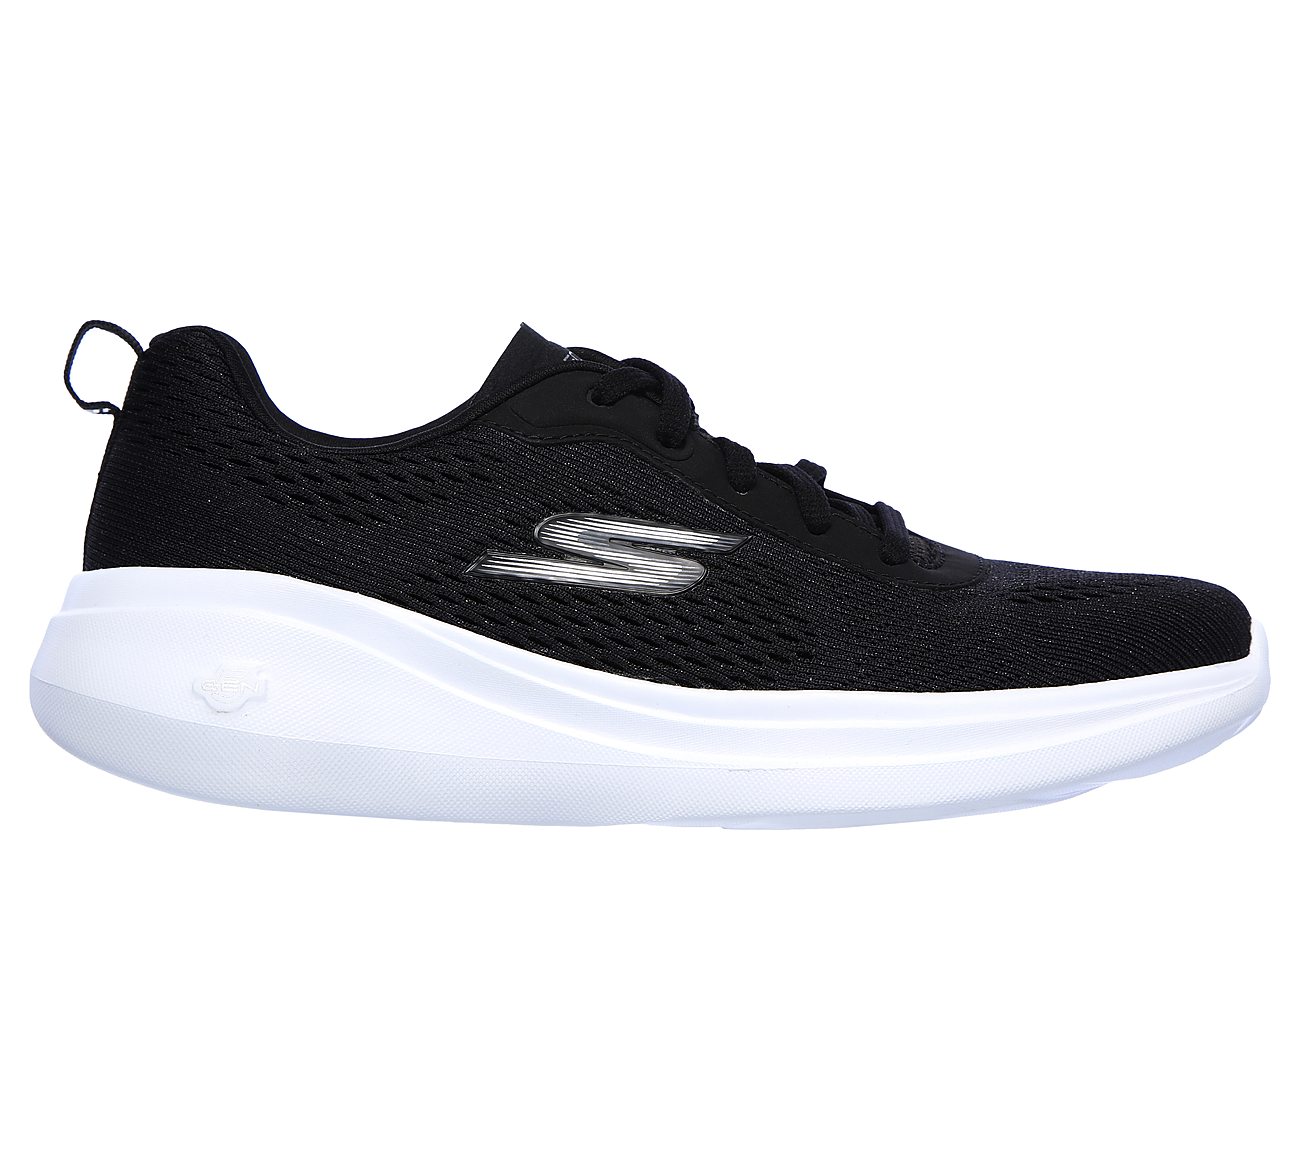 GO RUN FAST-FLOAT, BLACK/WHITE Footwear Right View